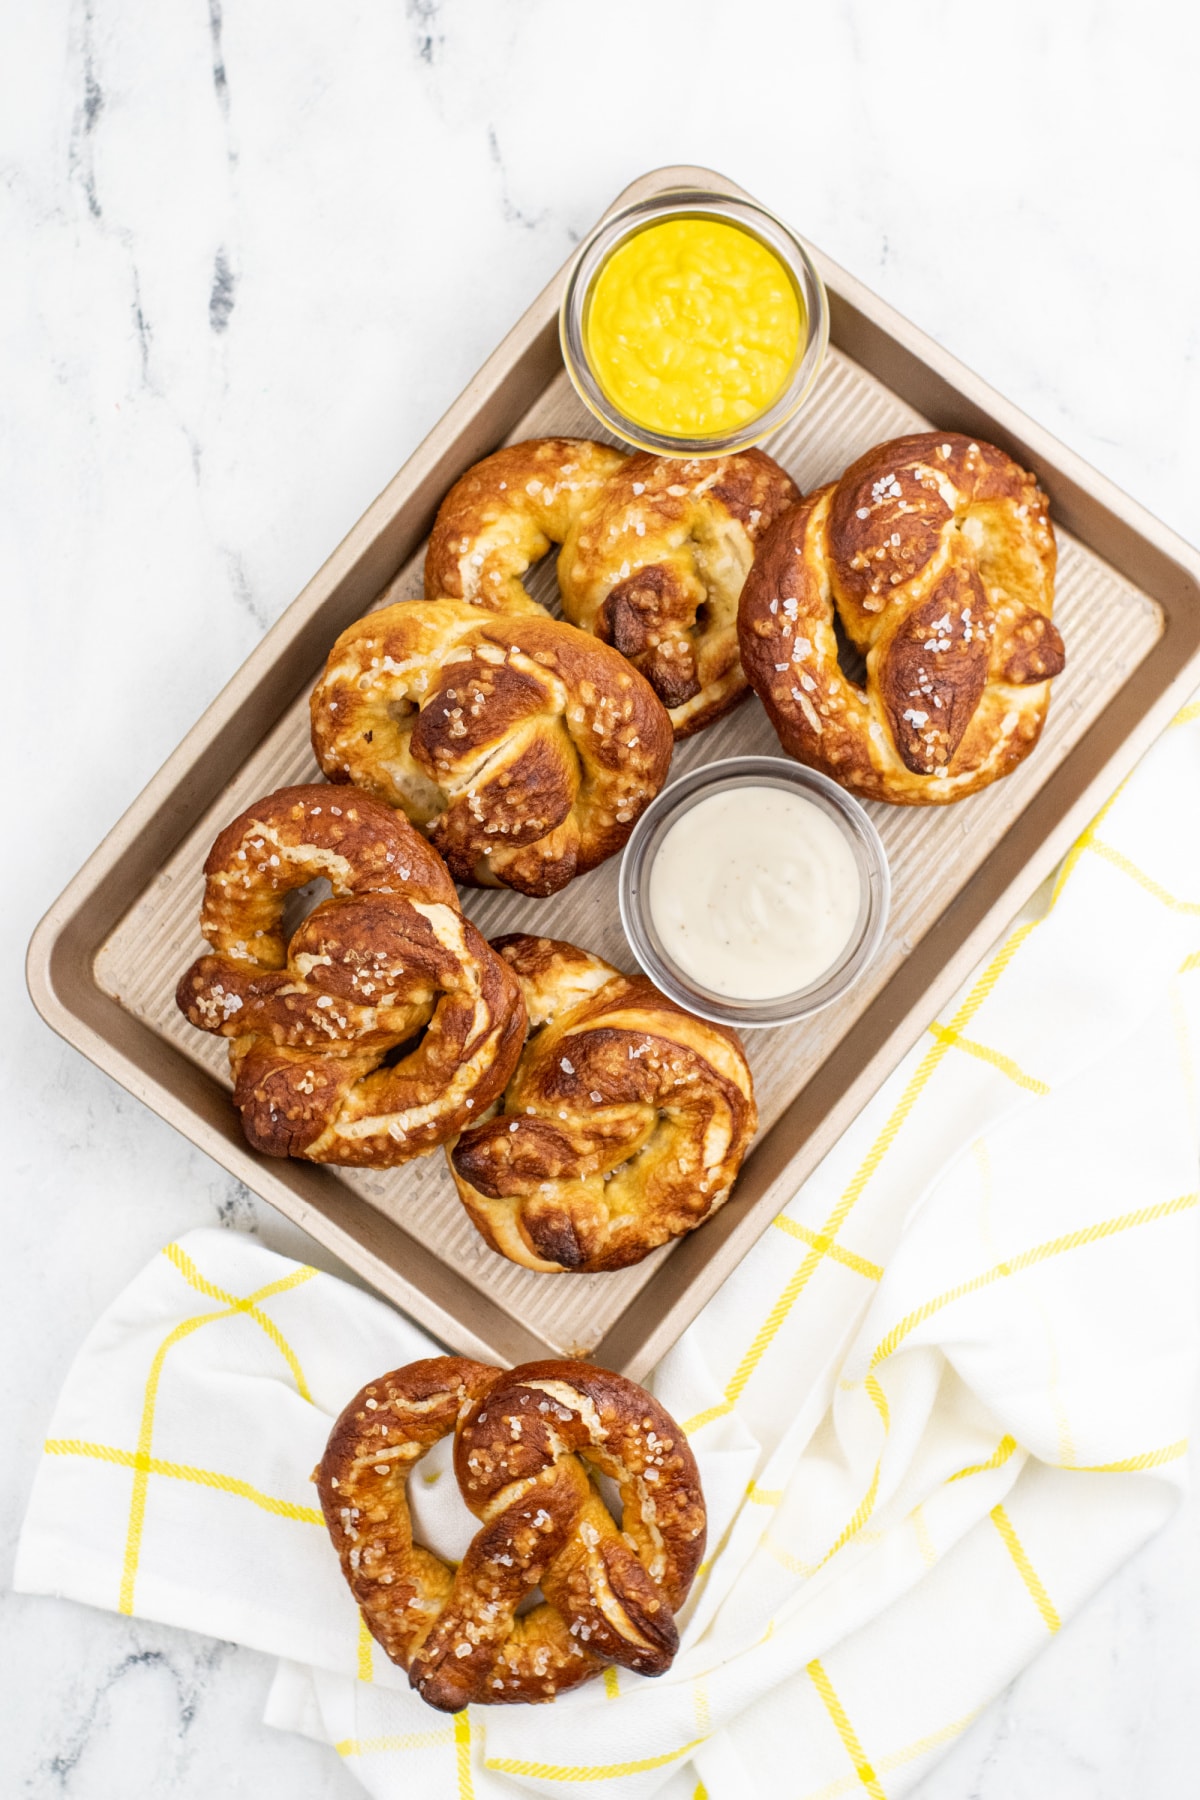 Soft pretzels with dipping sauces 